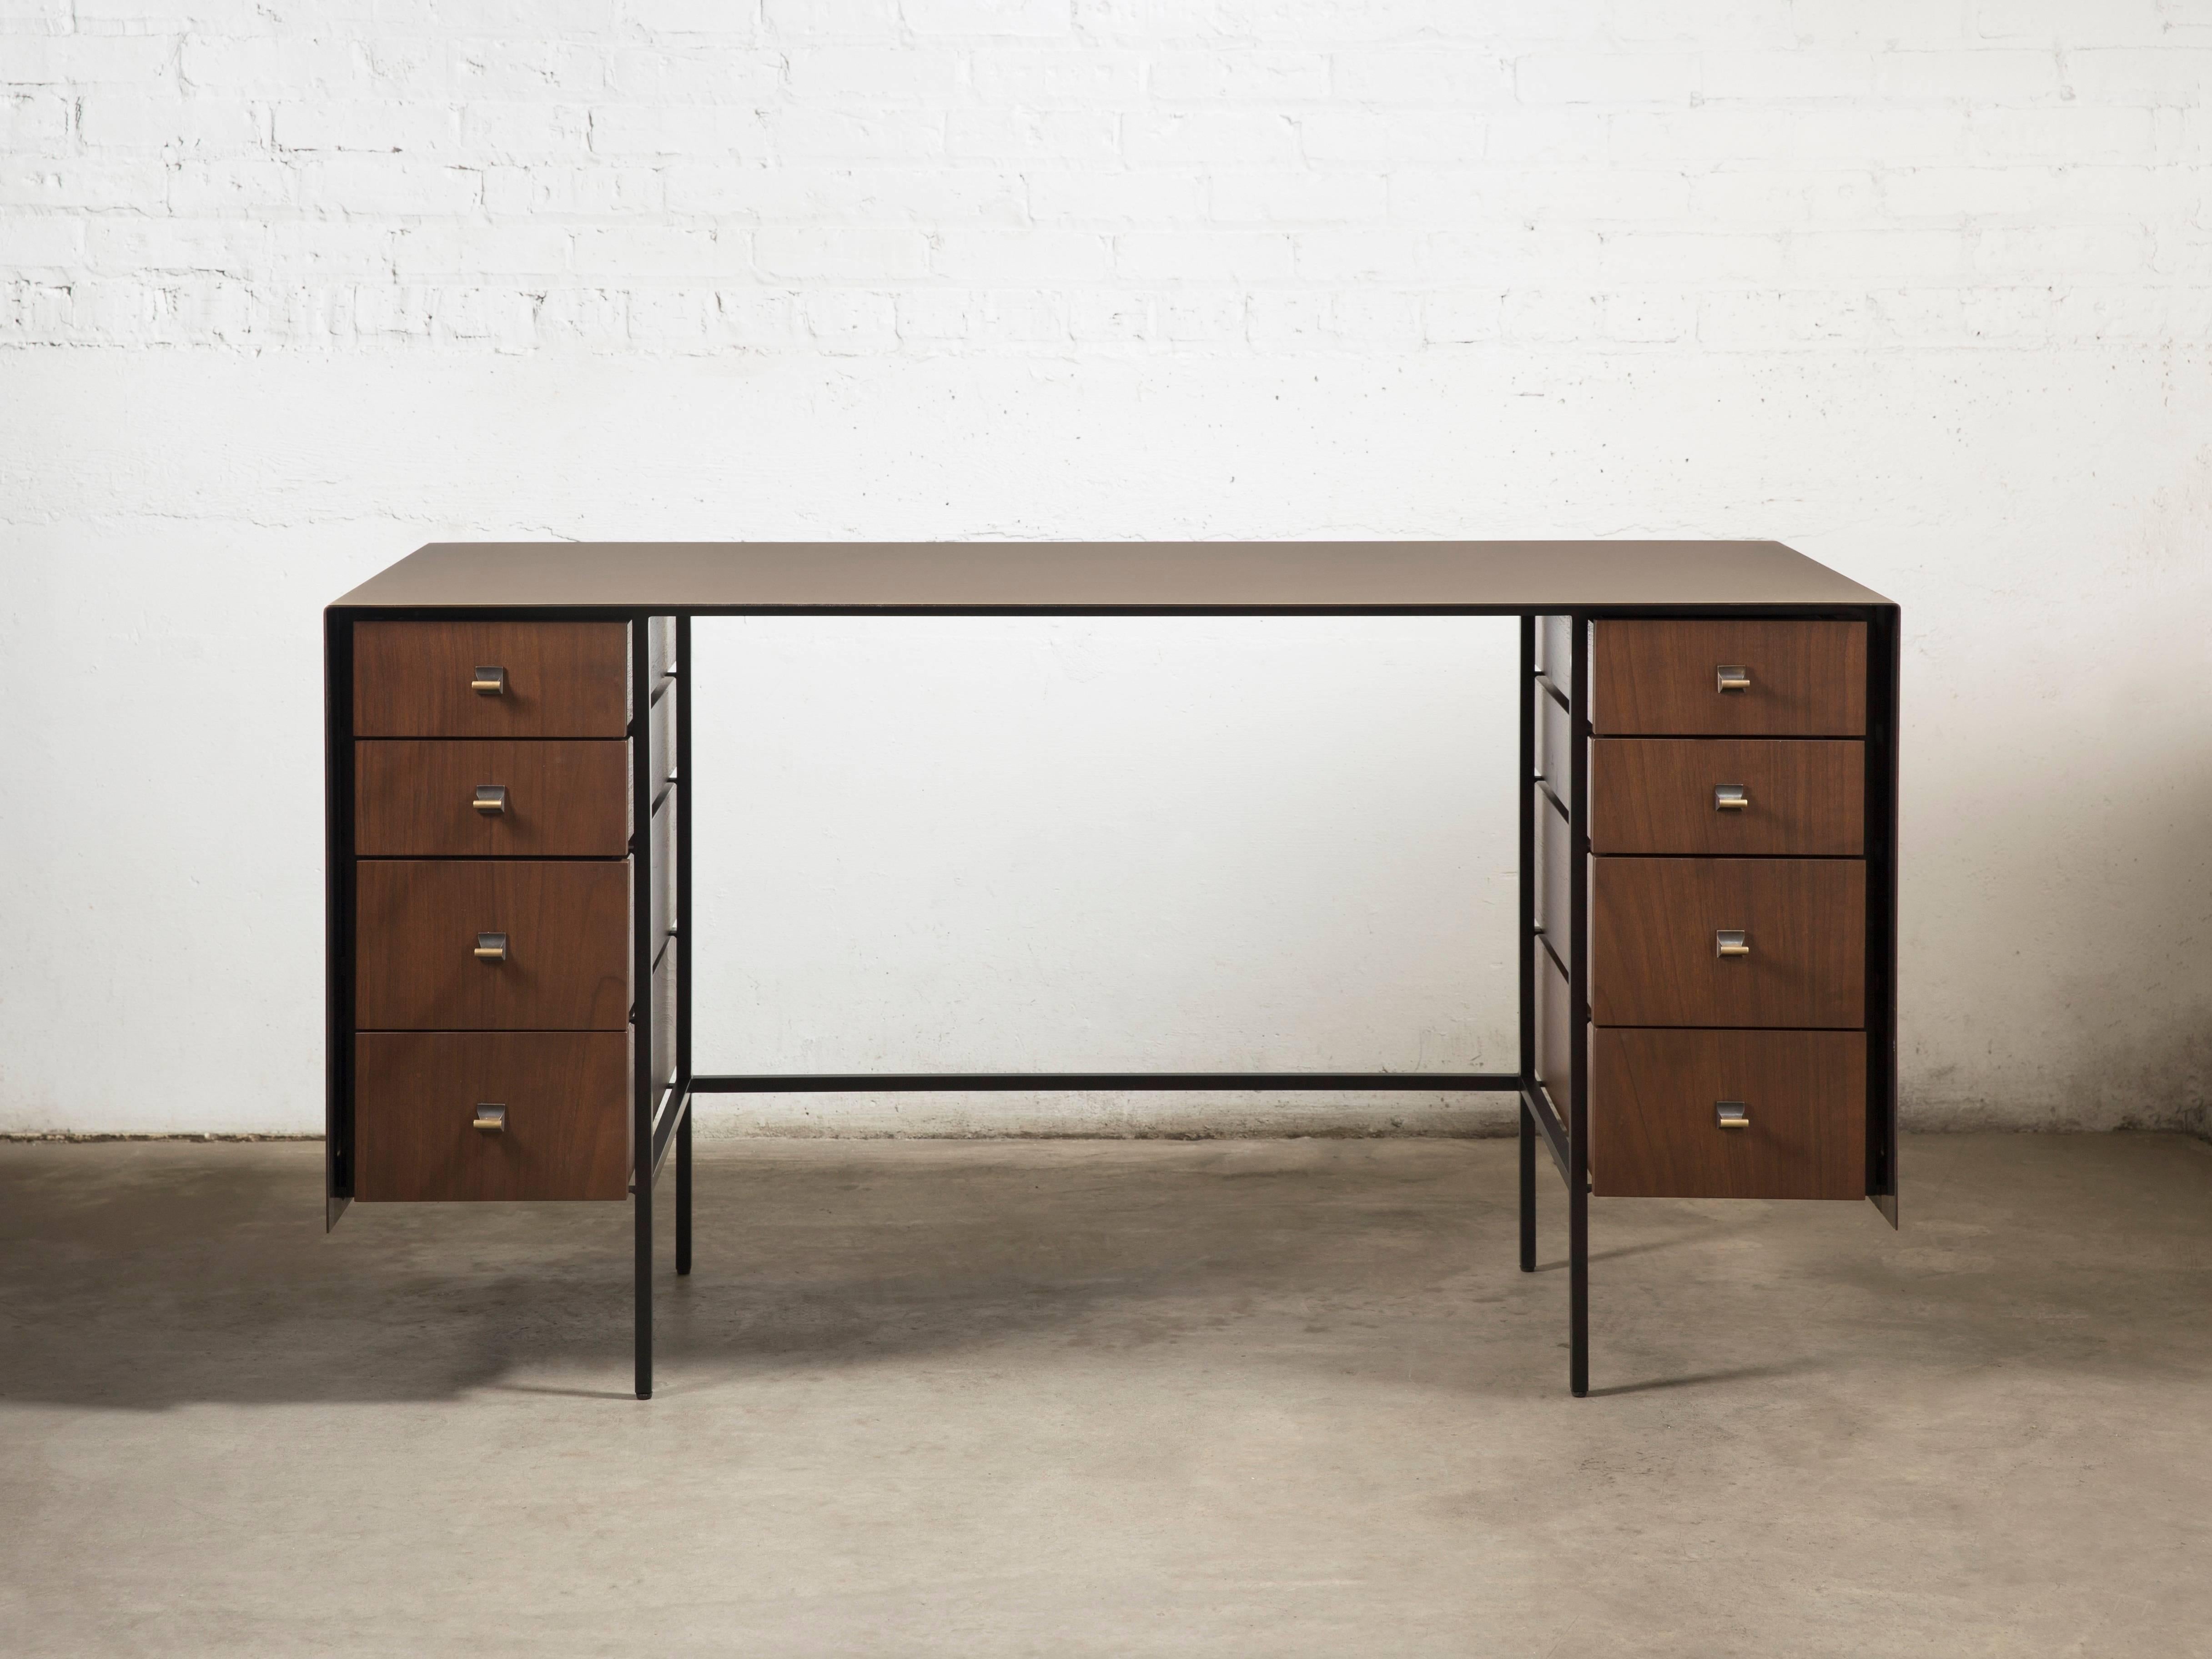 A single brass sheet is bent creating the surface and sides, aptly giving the desk its name. The finish is darkened by hand through a proprietary solution and the drawers are made from solid walnut and veneered fronts. Perfect as a writing desk in